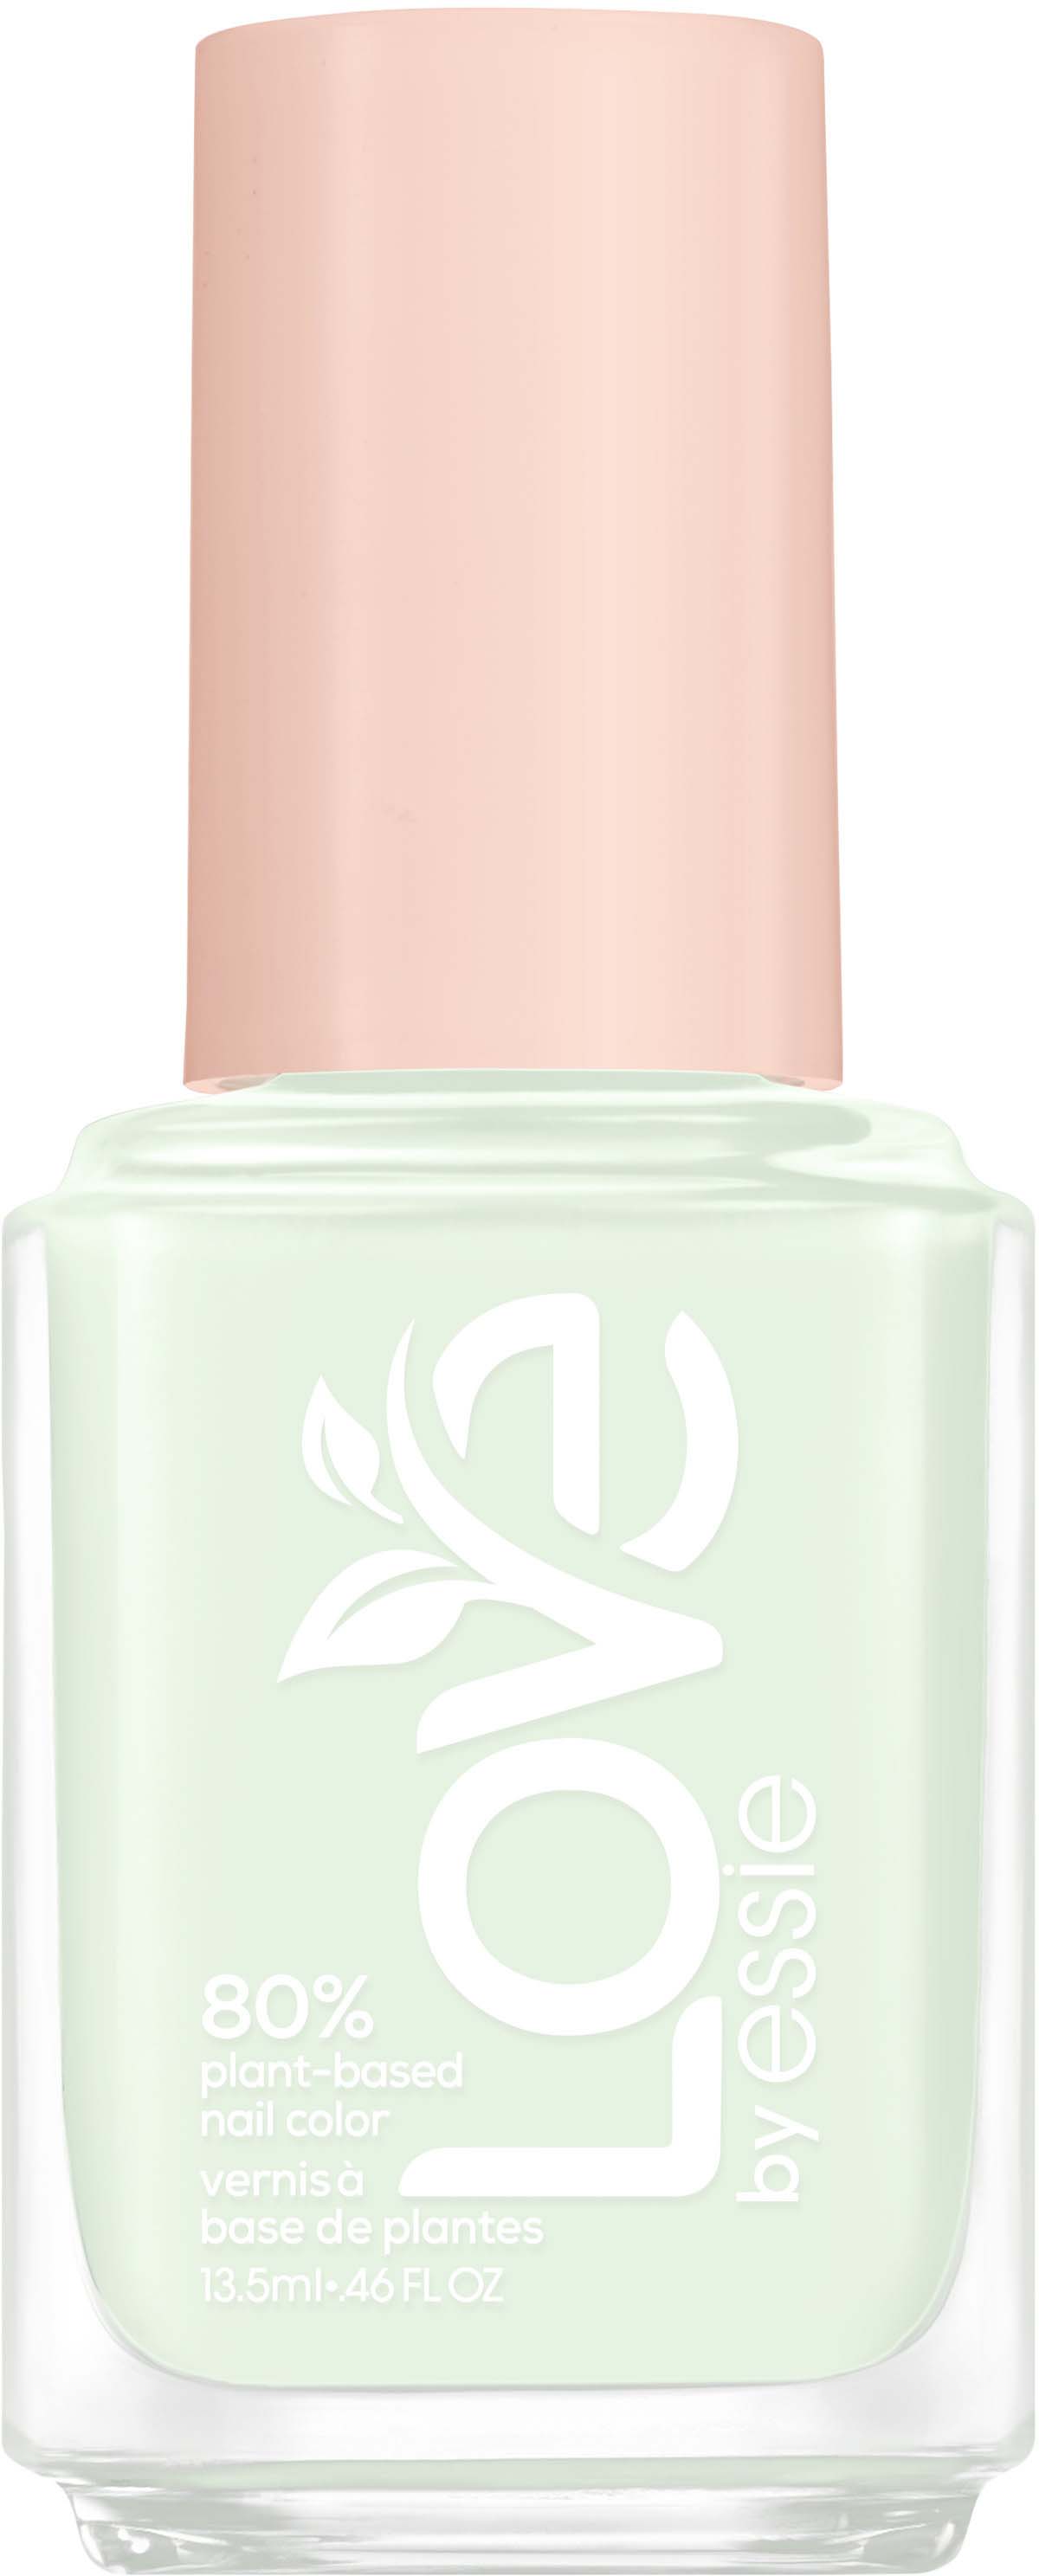 80% Essie Plant-based Nail Thrive Essie 220 LOVE To Revive Color by